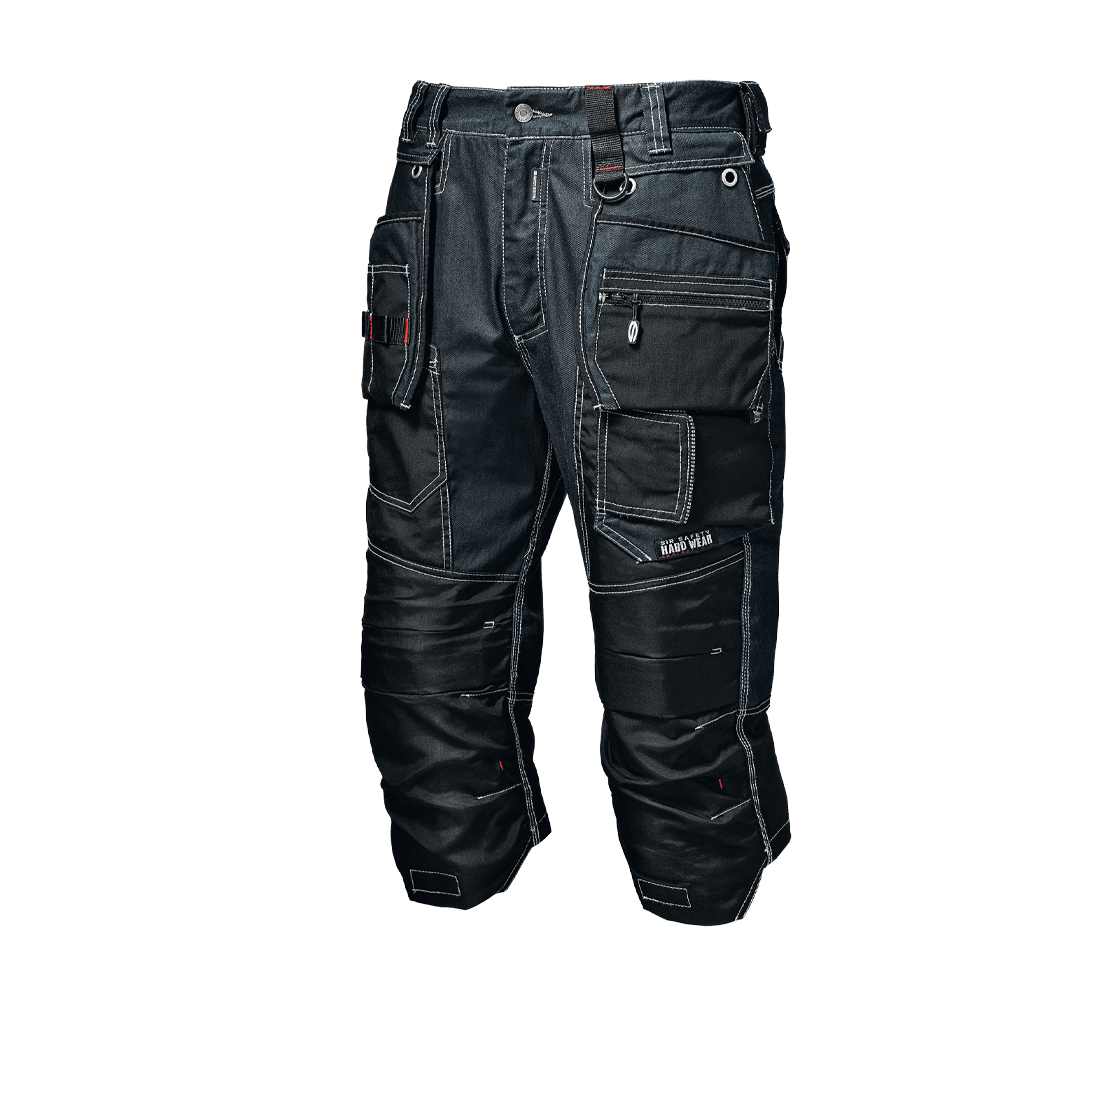 SYMBOL TROUSERS | Sir Safety System